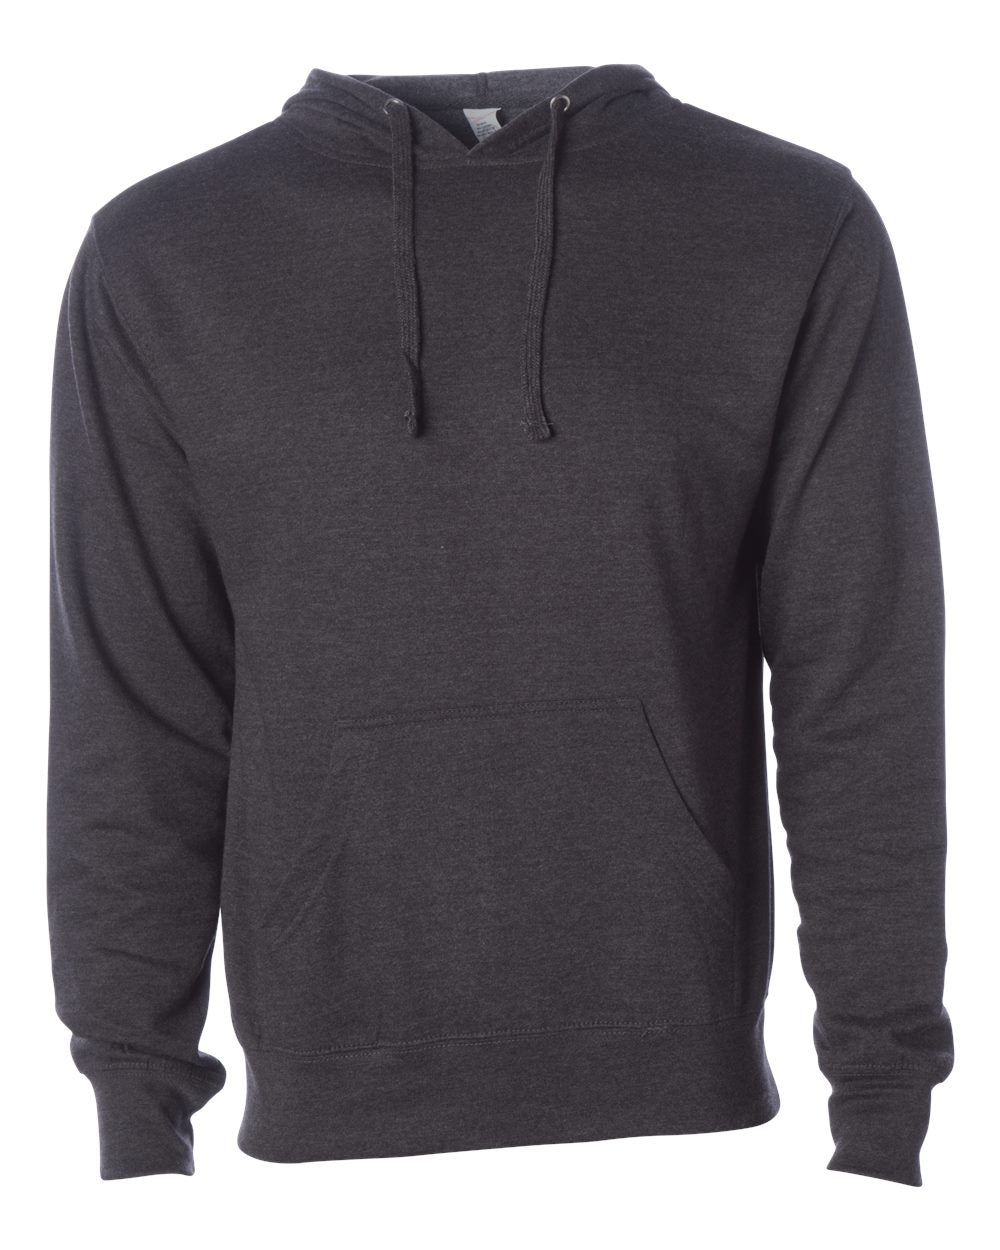 Independent Trading Co. Midweight Hooded Sweatshirt SS4500 #color_Charcoal Heather